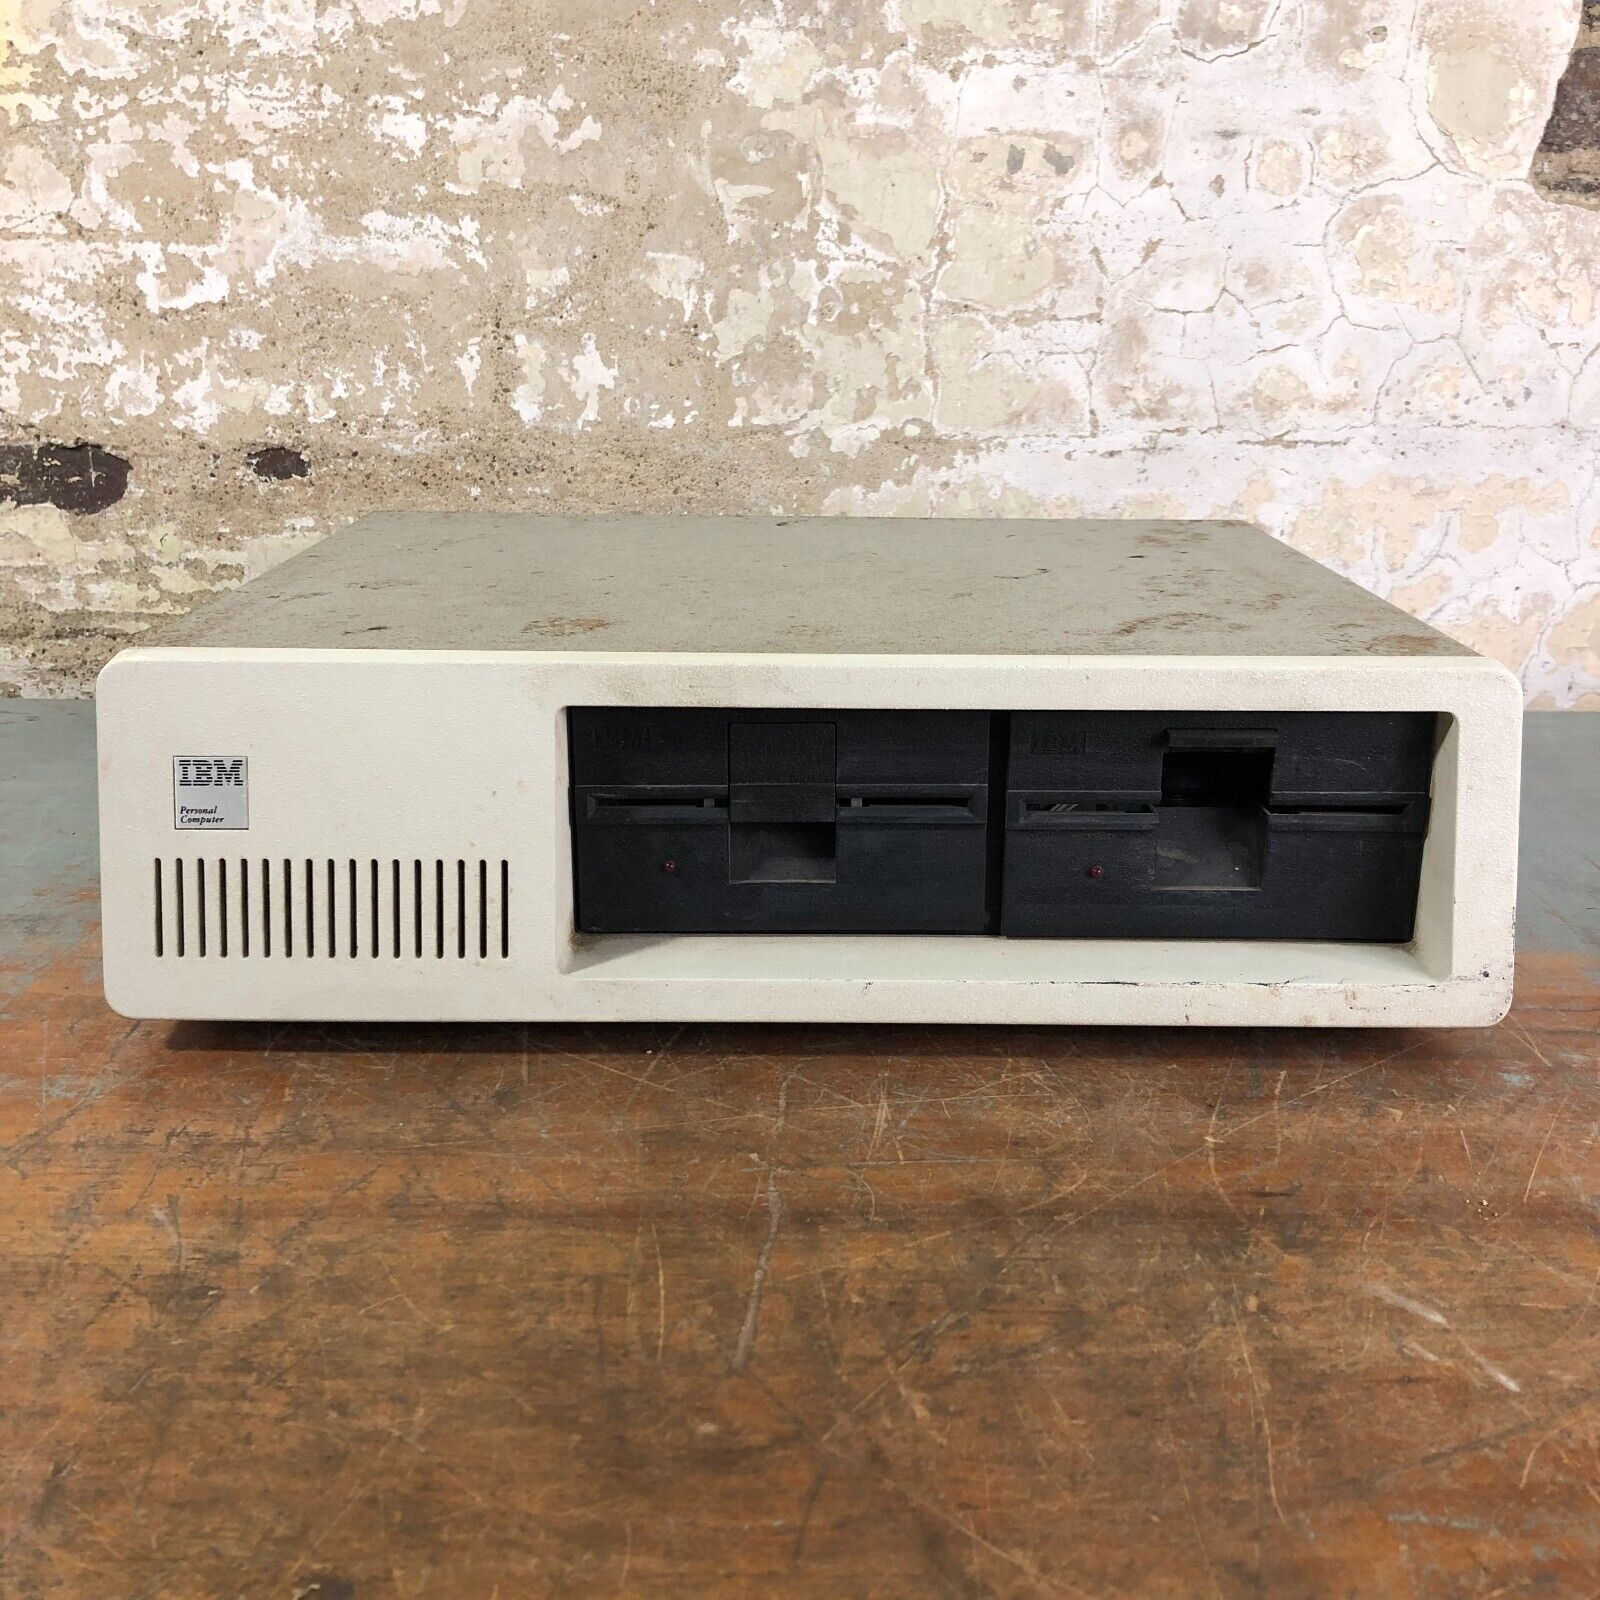 Vintage IBM PC XT 5150 Personal Computer - Complete Ready for Restoration